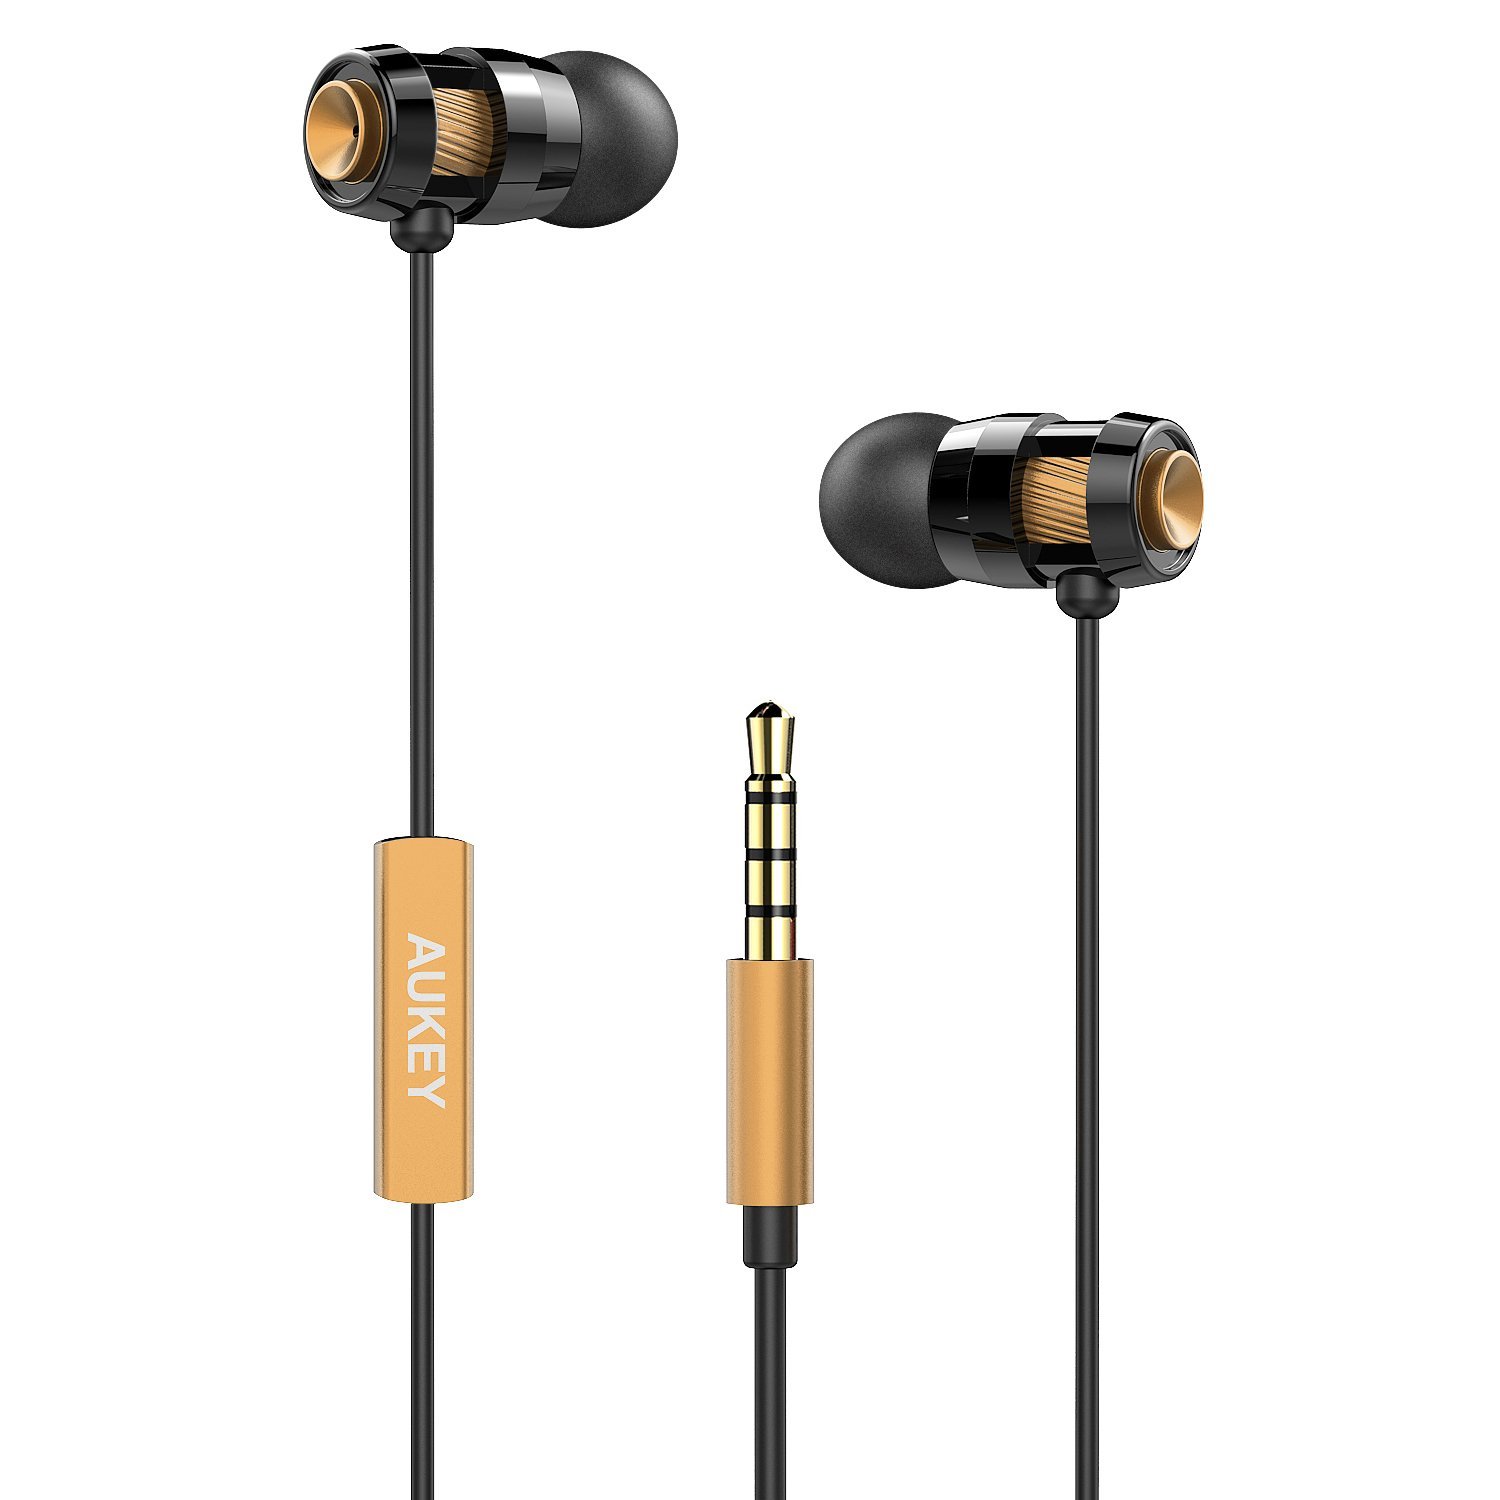 Aukey in-ear headphones with built-in microphone for $4